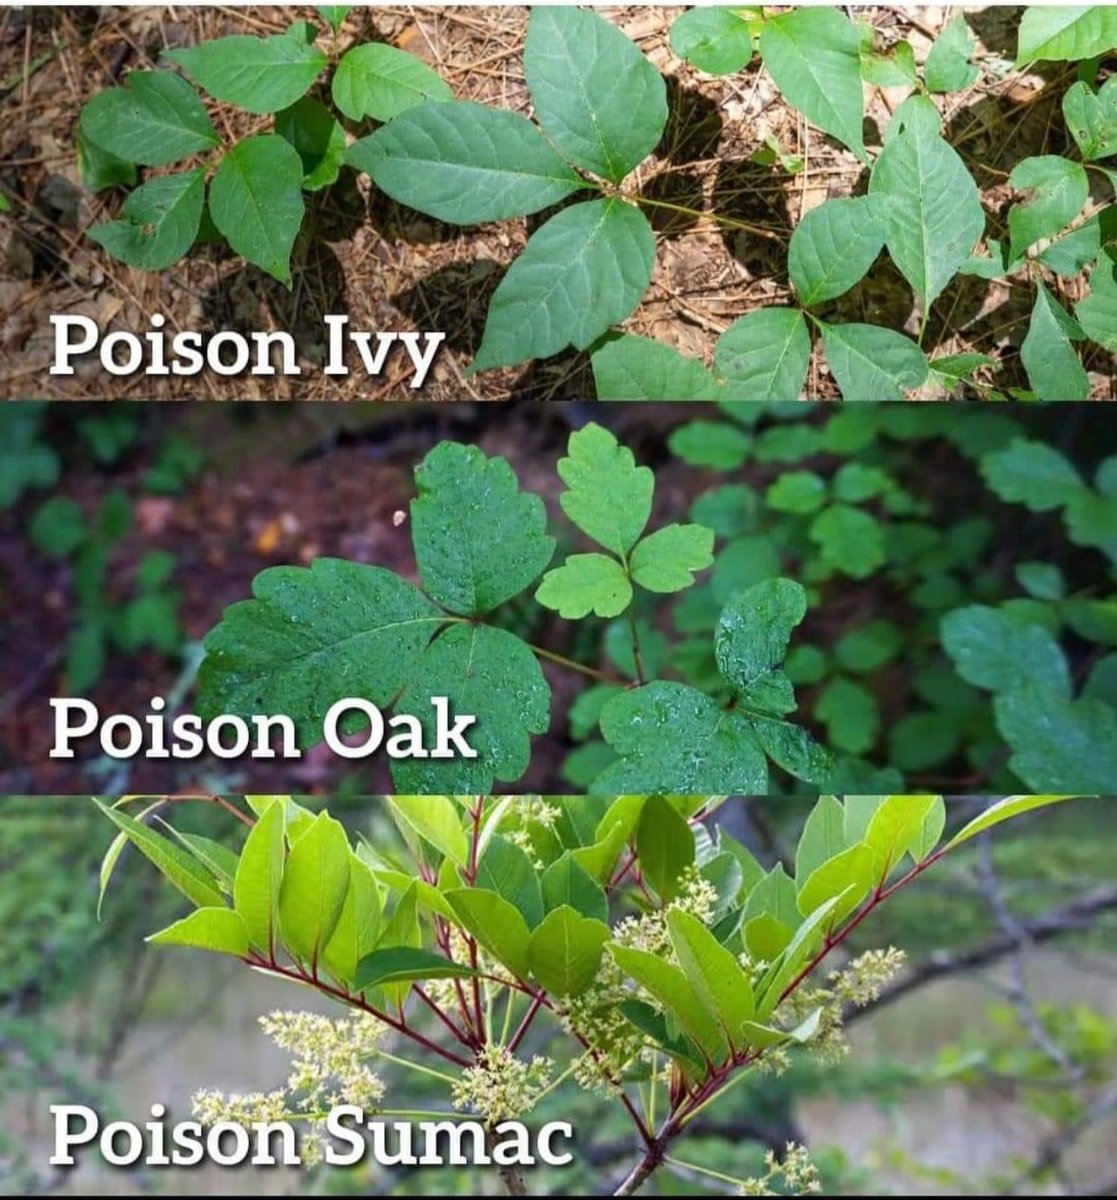 I have a poison sumac growing in my backyard. How can I kill it? I don’t want to spray roundup because little stream going down by my property.